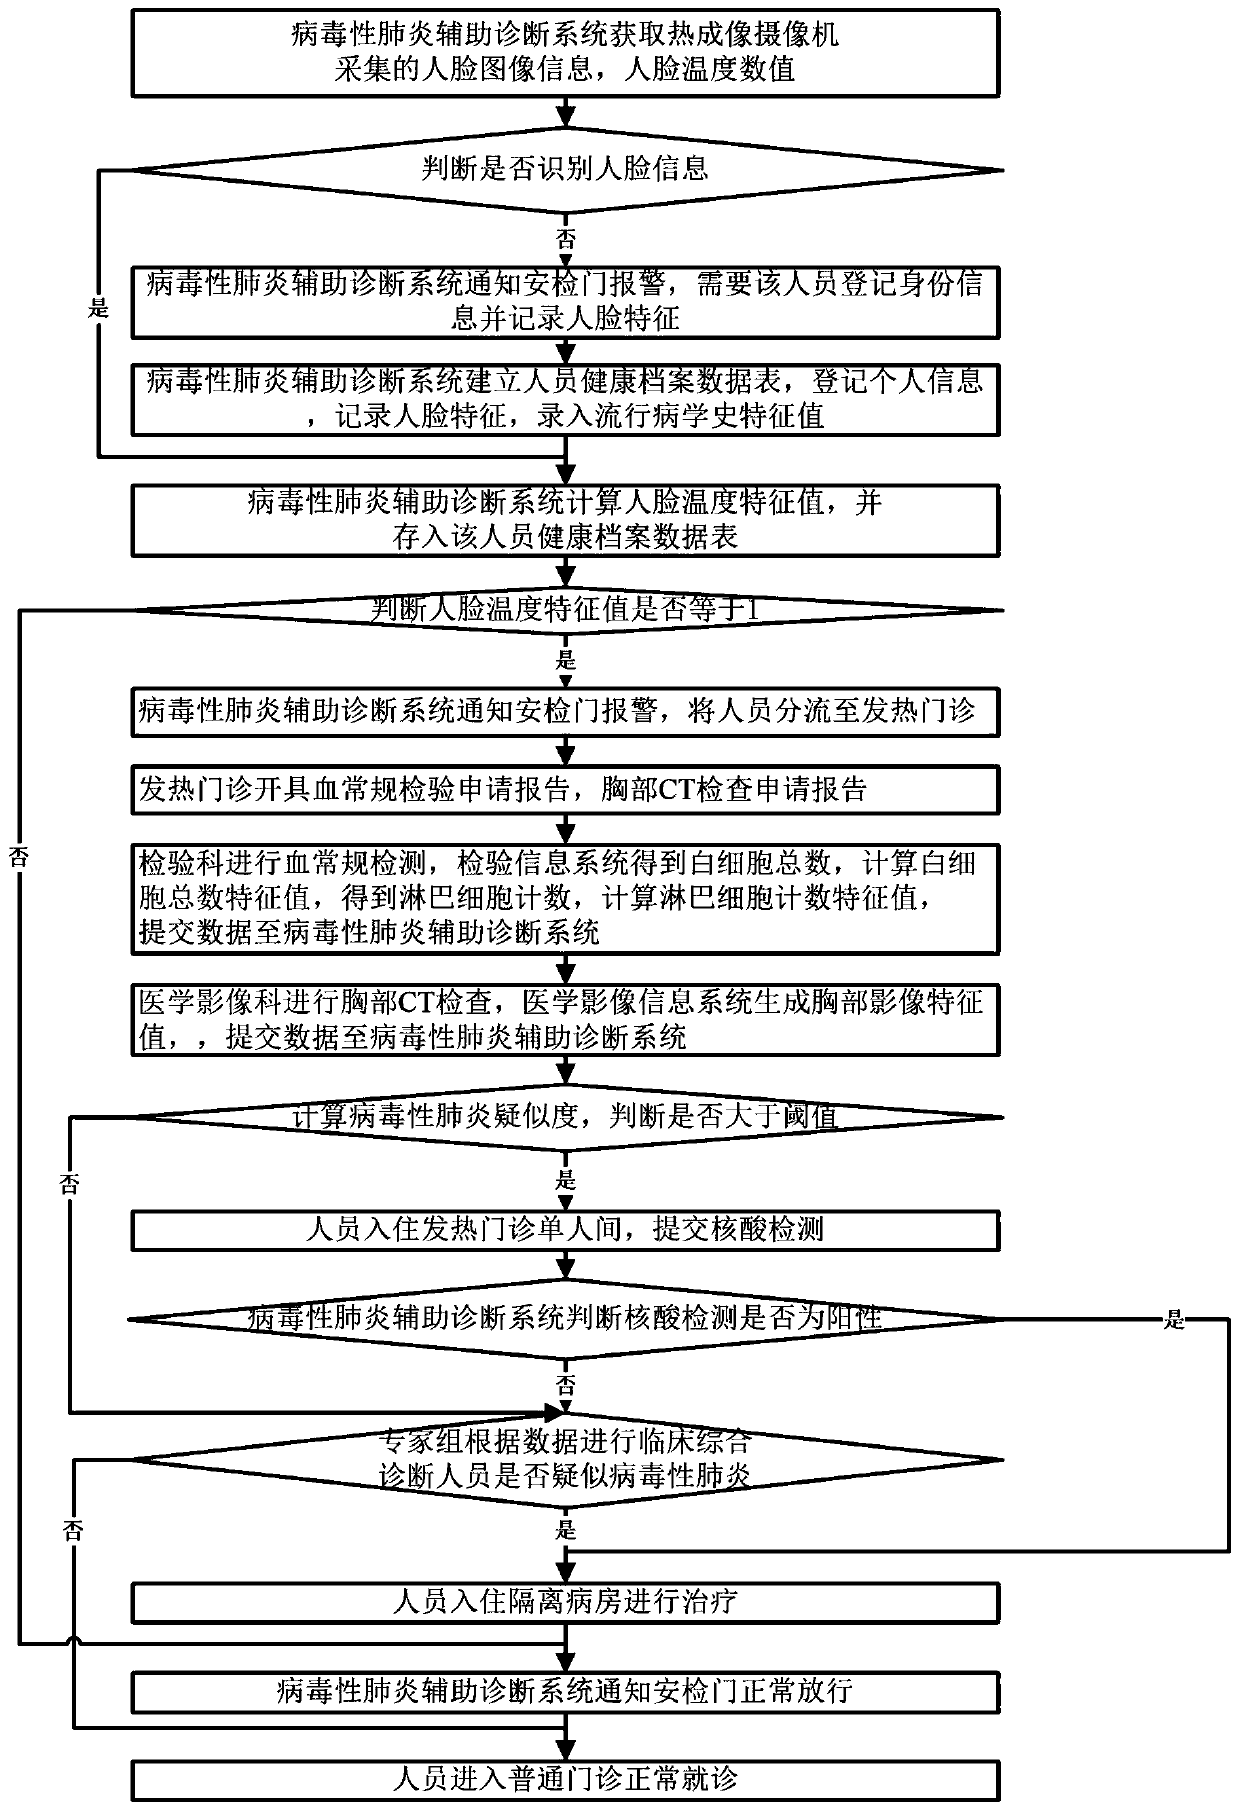 Viral pneumonia auxiliary diagnosis device and method